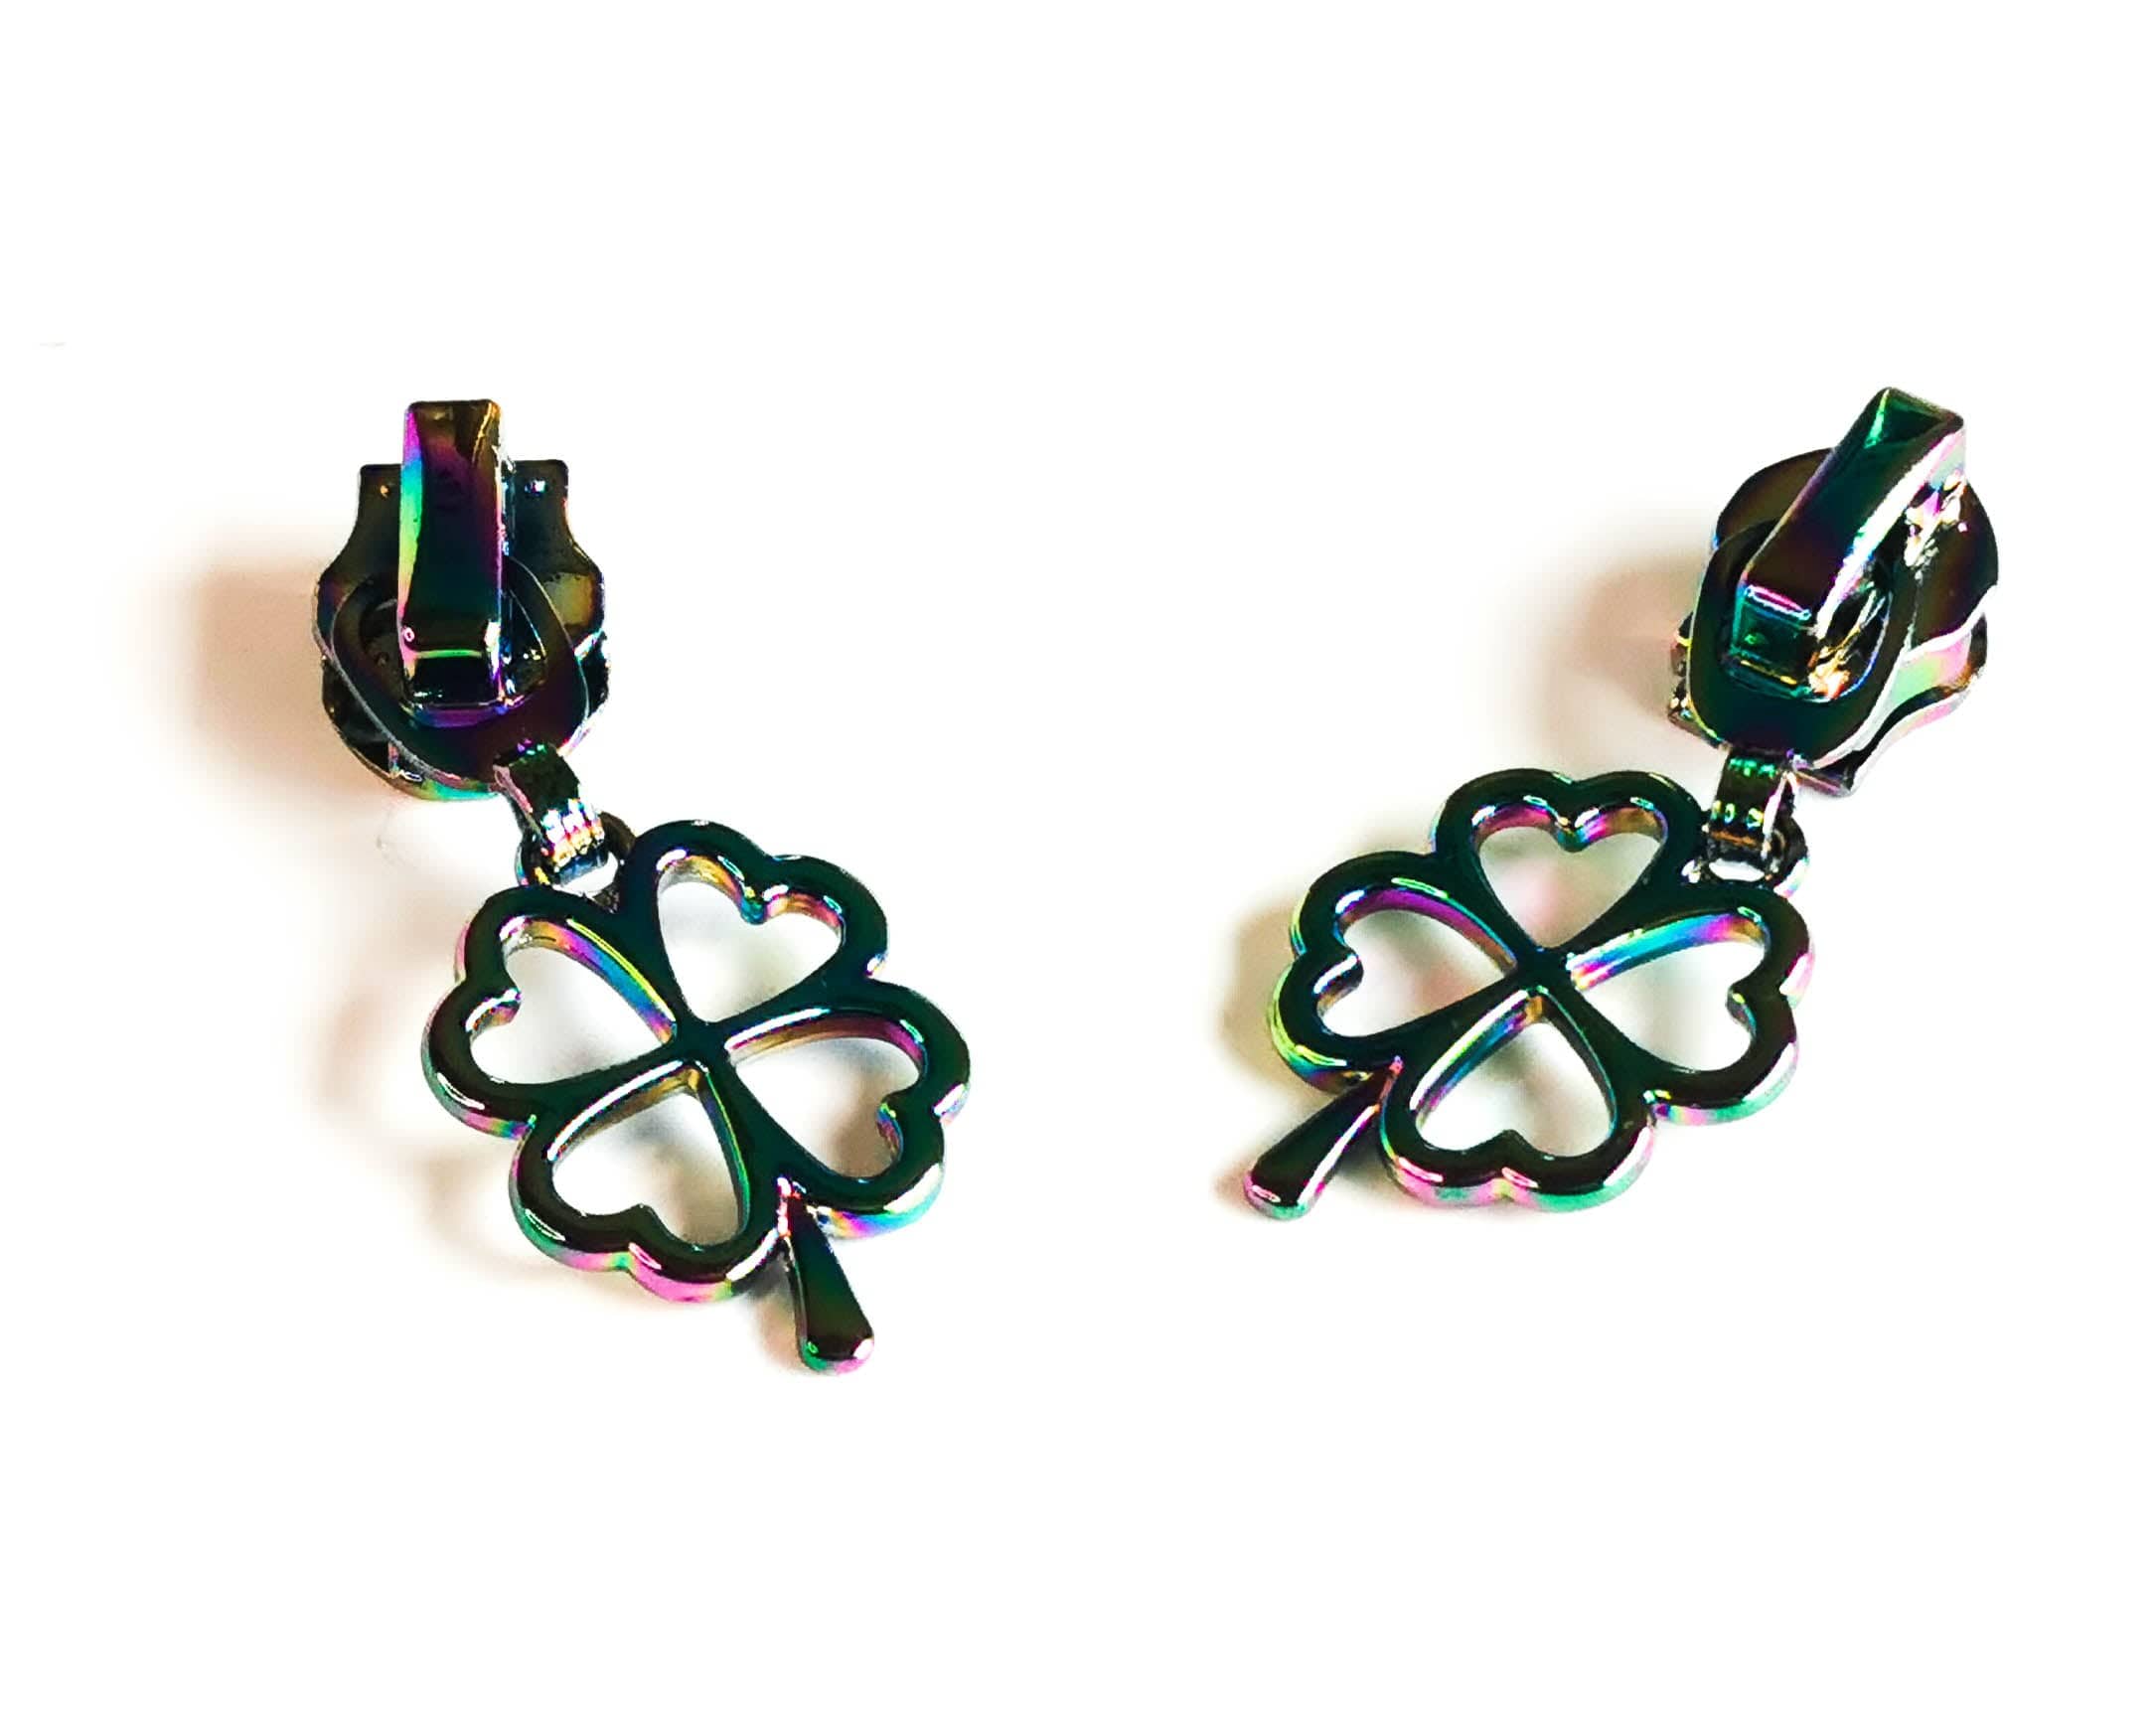 Fancy Zipper Pulls. Hearts and four Leaf Clover For #5 Metallic Nylon Coil Zipper tape Pack of Two. By Kiwi Bagineers - Kiwi Bagineers